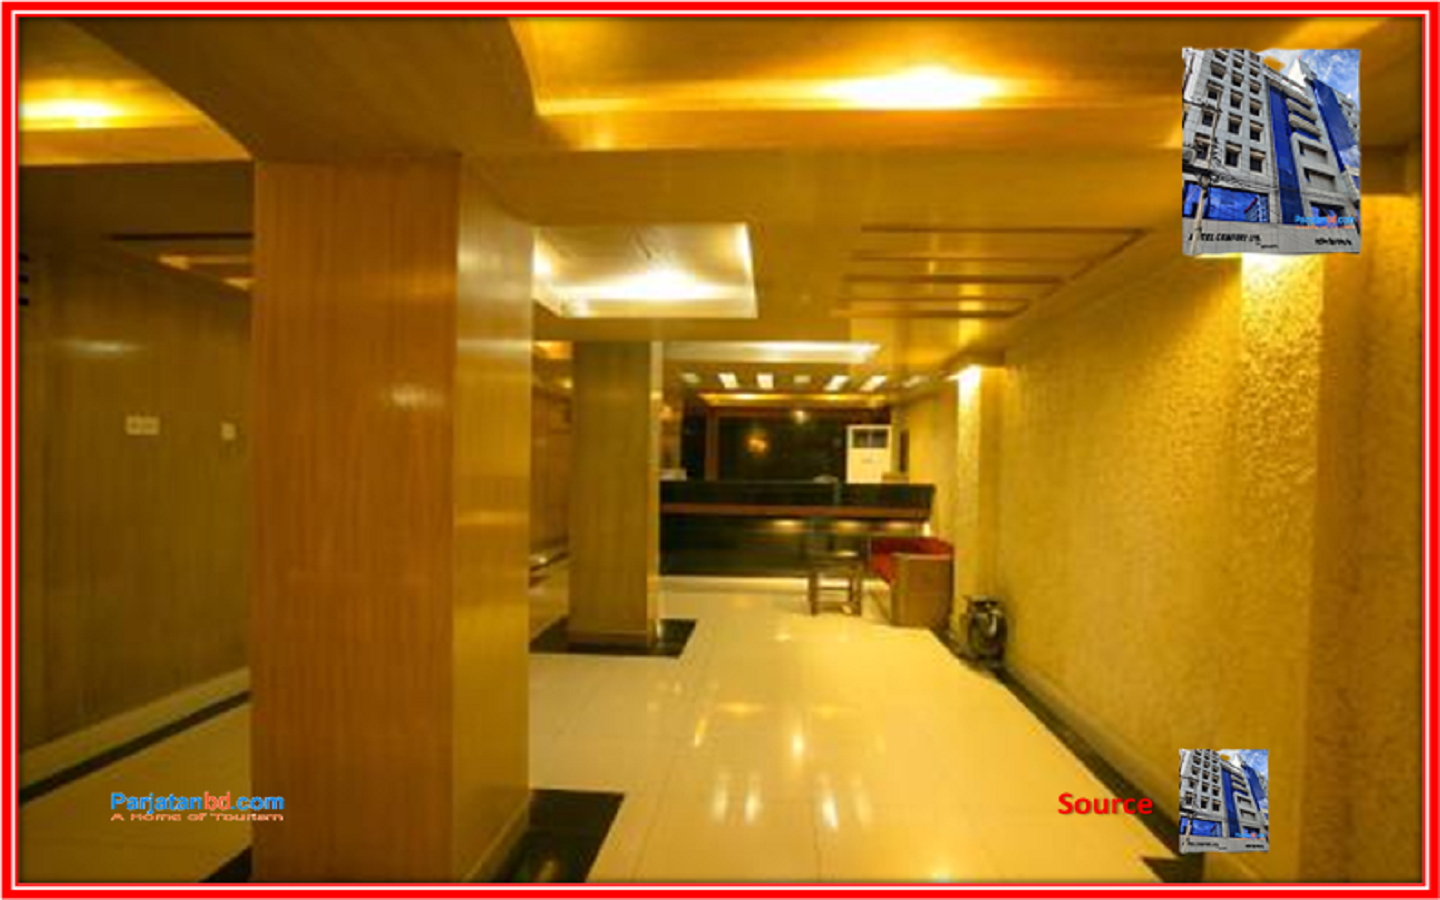 Hotel Comfort Ltd, Chittagong Picture-1